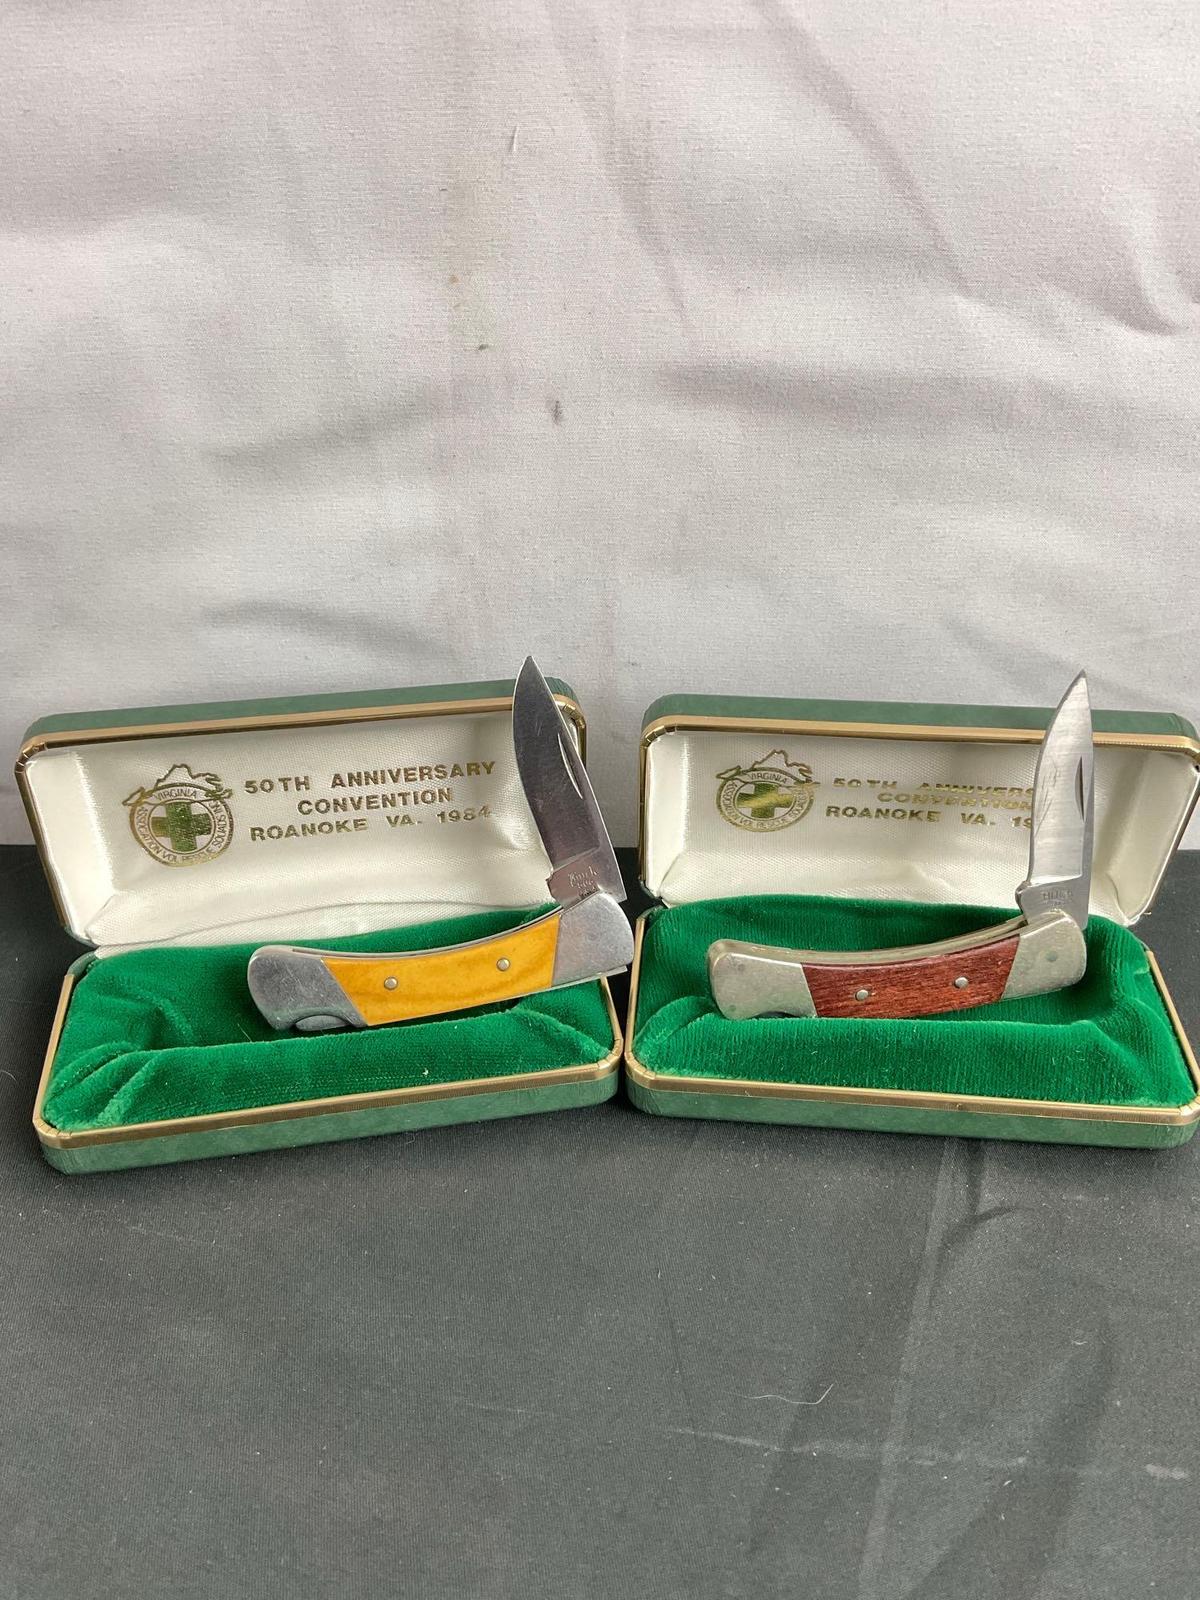 Buck Folding Pocket Knives - 50th Anniversary Convention Knives - Numbered 506 & 505